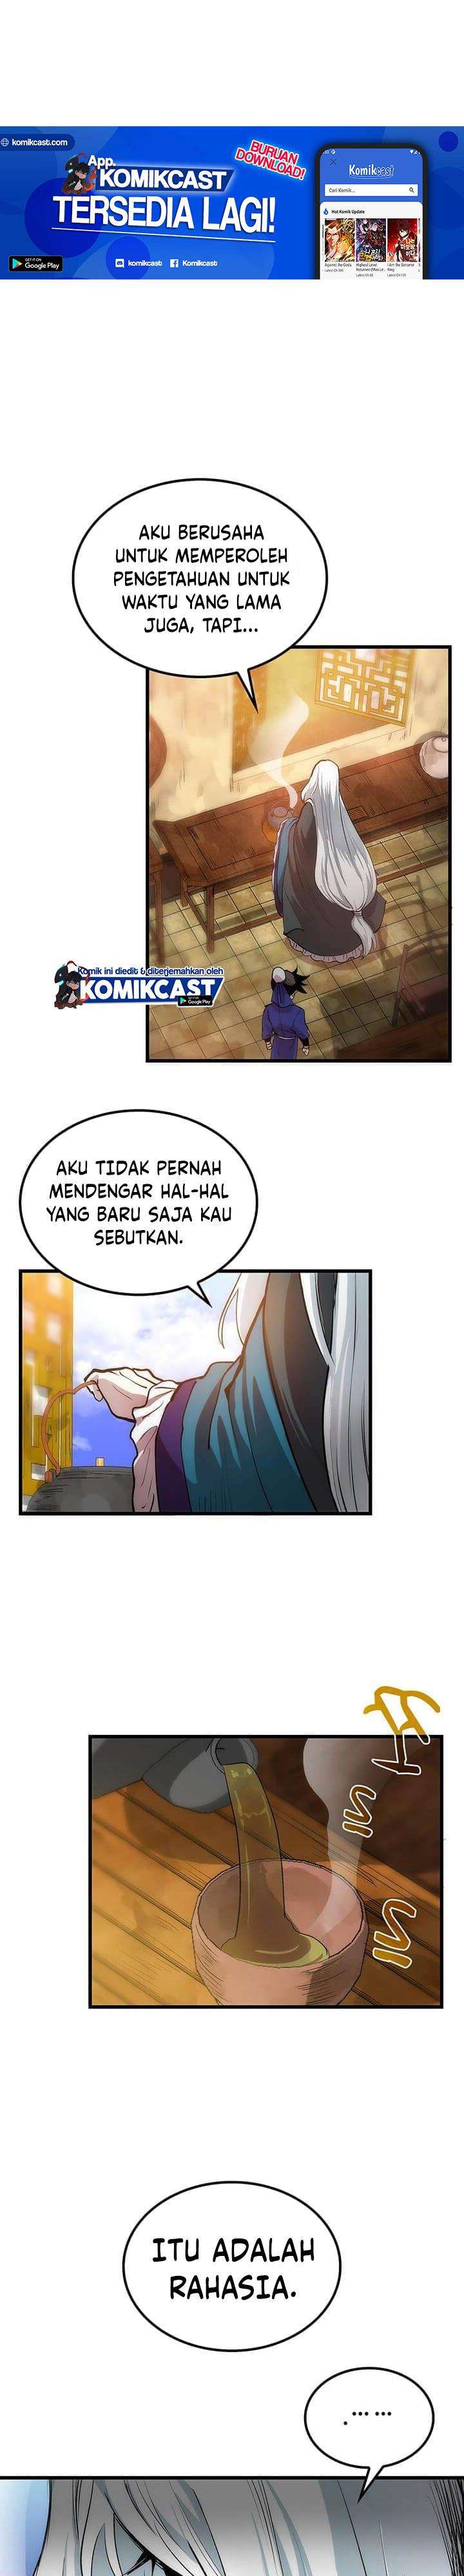 Doctor’s Rebirth Chapter 14